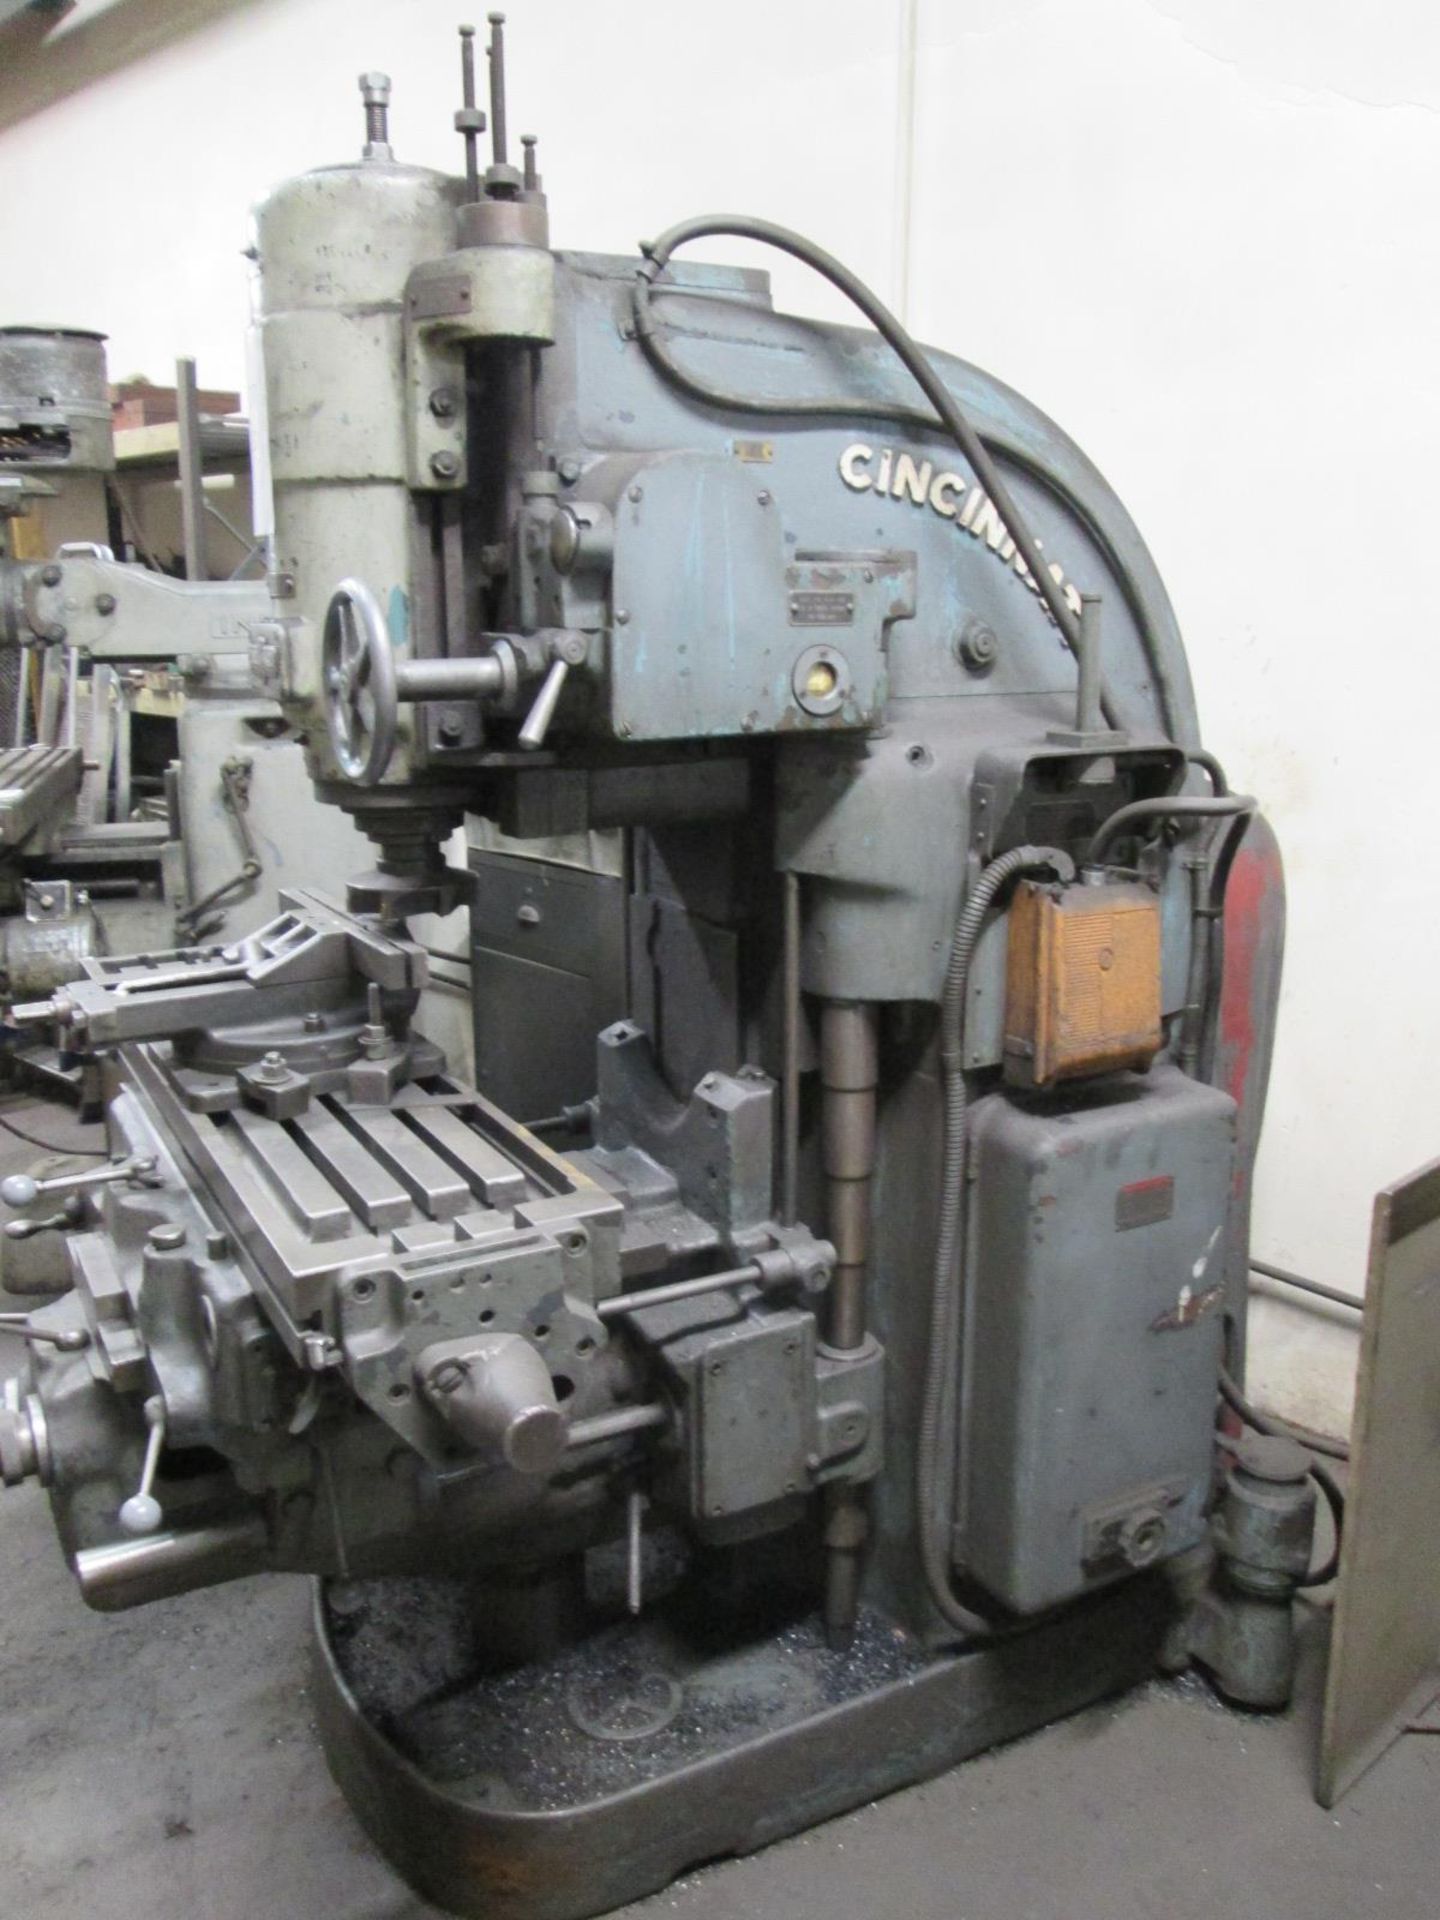 Cincinnati No 3 Vertical Milling Machine, Table size 1360 mm x 310 mm, Spindle speeds 20-1200 rpm, - Image 3 of 12